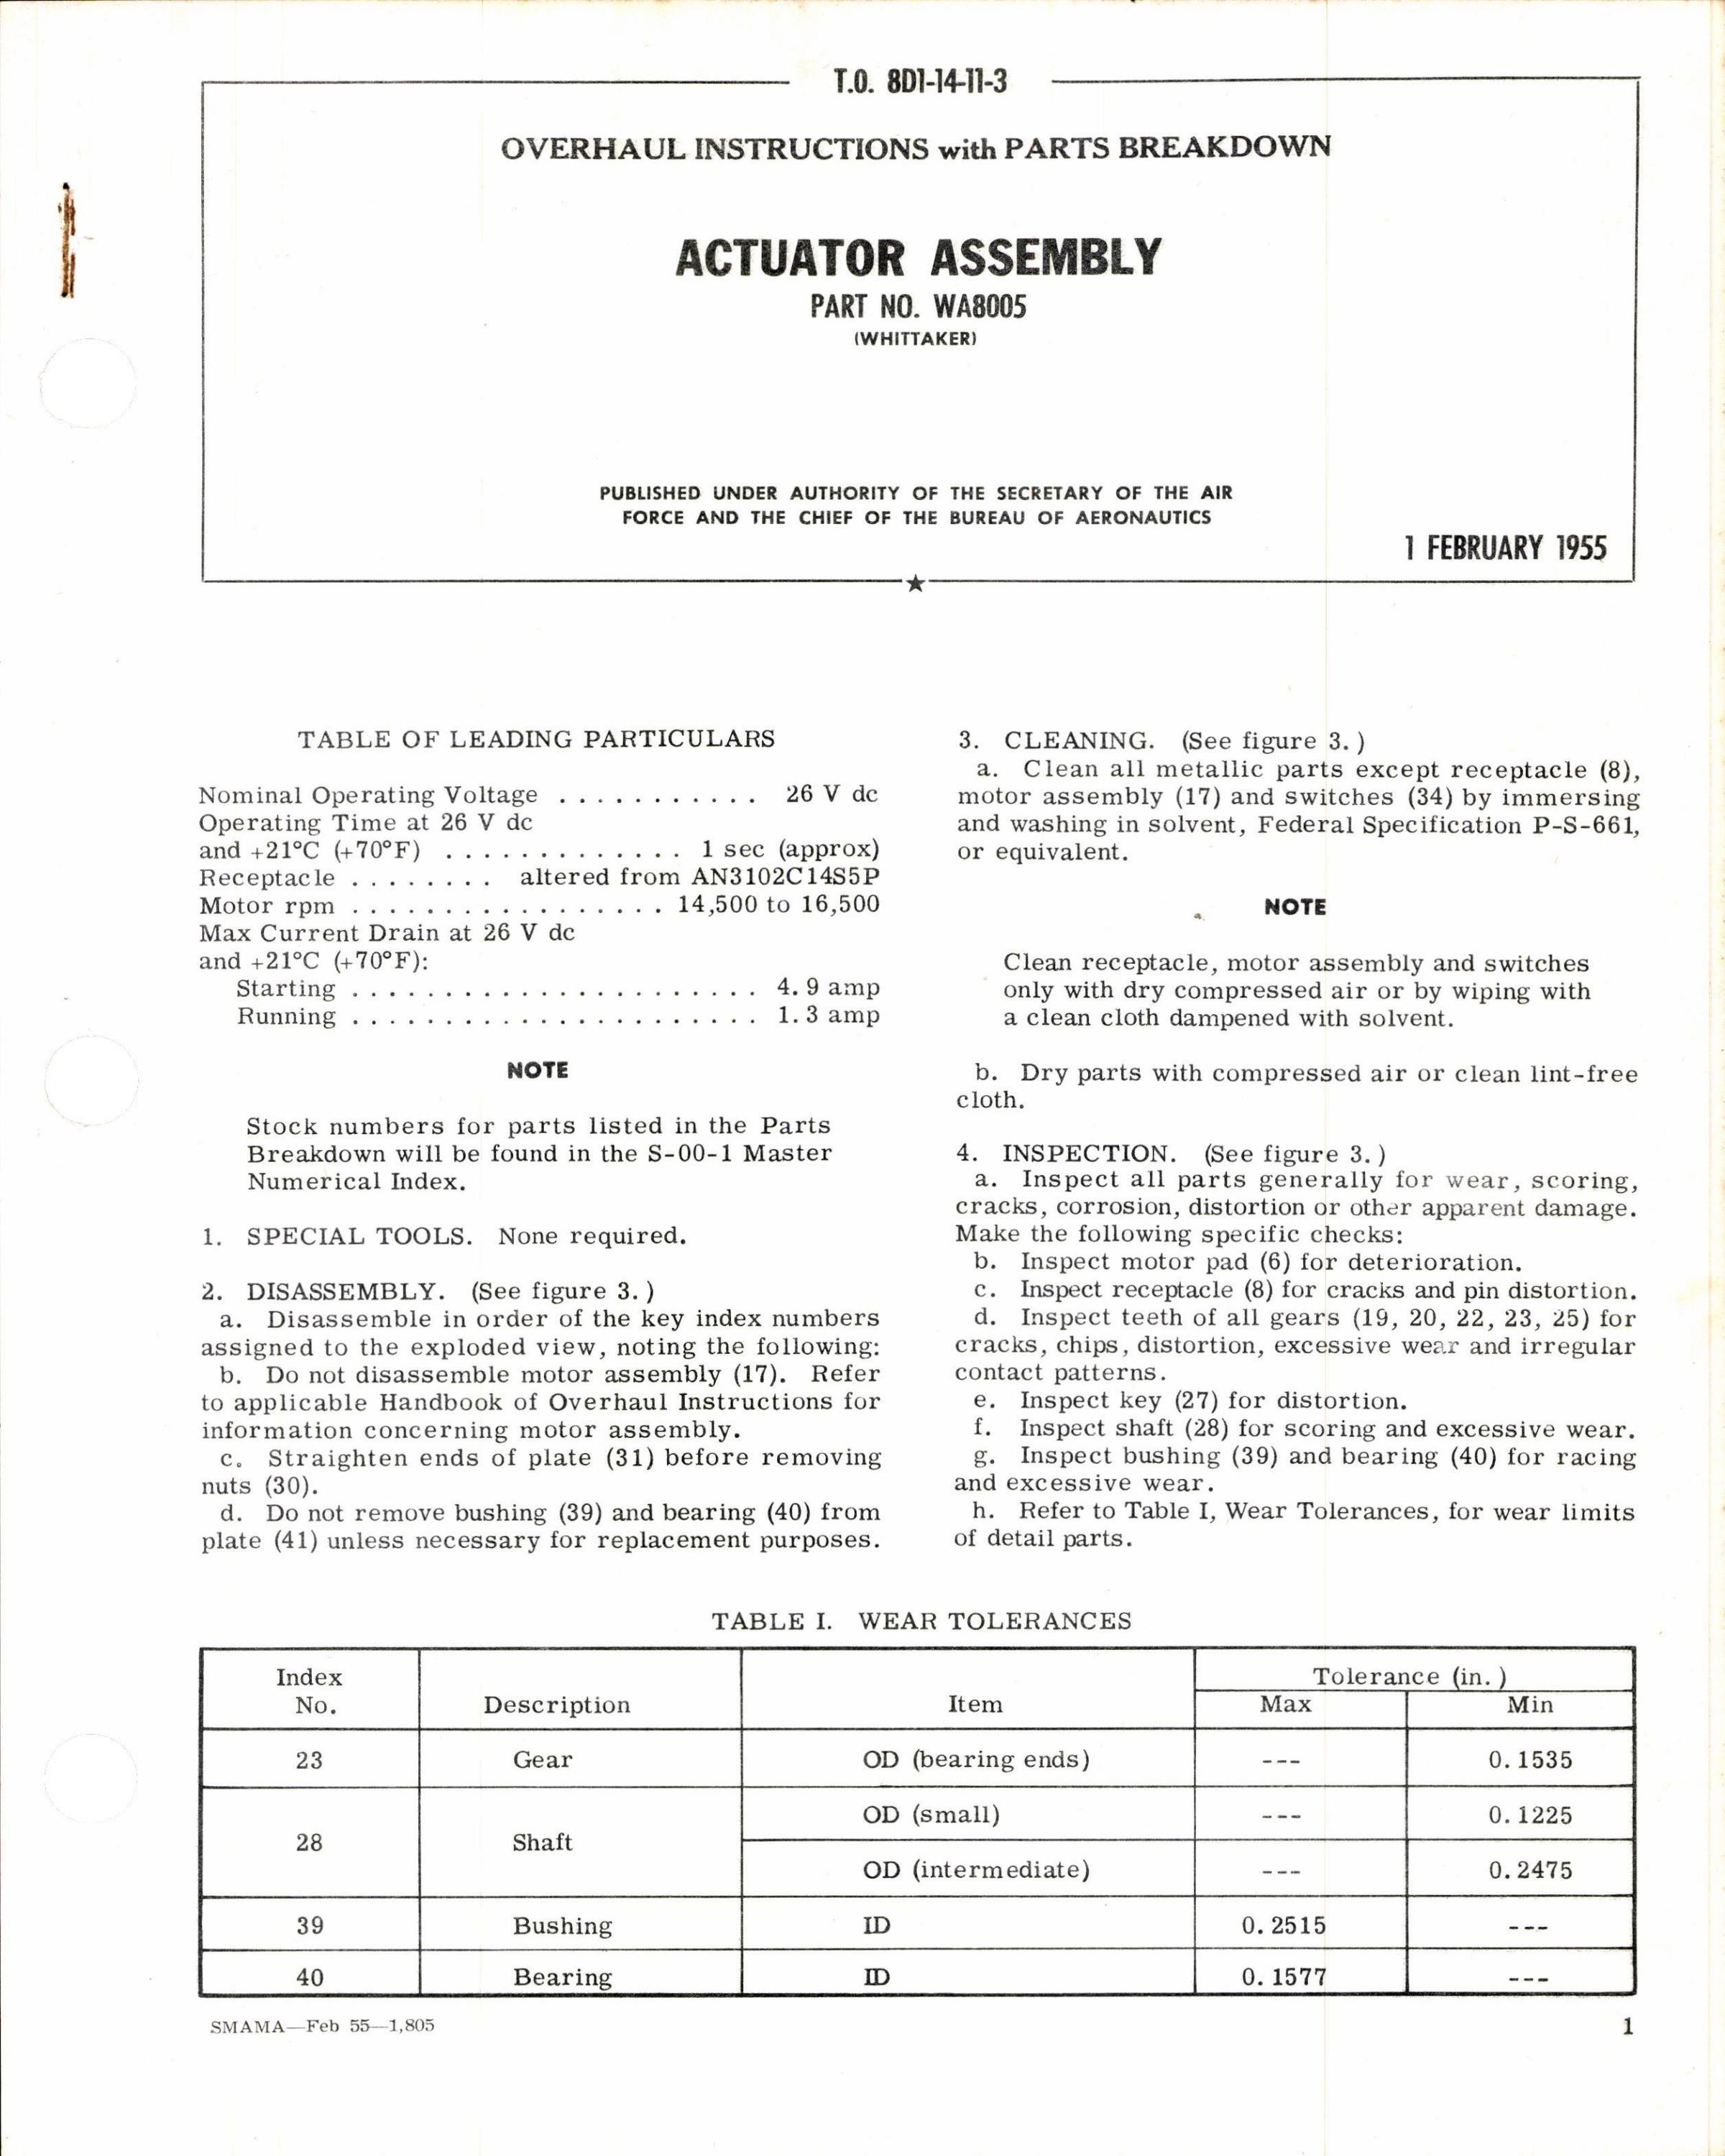 Sample page 1 from AirCorps Library document: Instructions w Parts Breakdown for Actuator Assembly Part WA8005